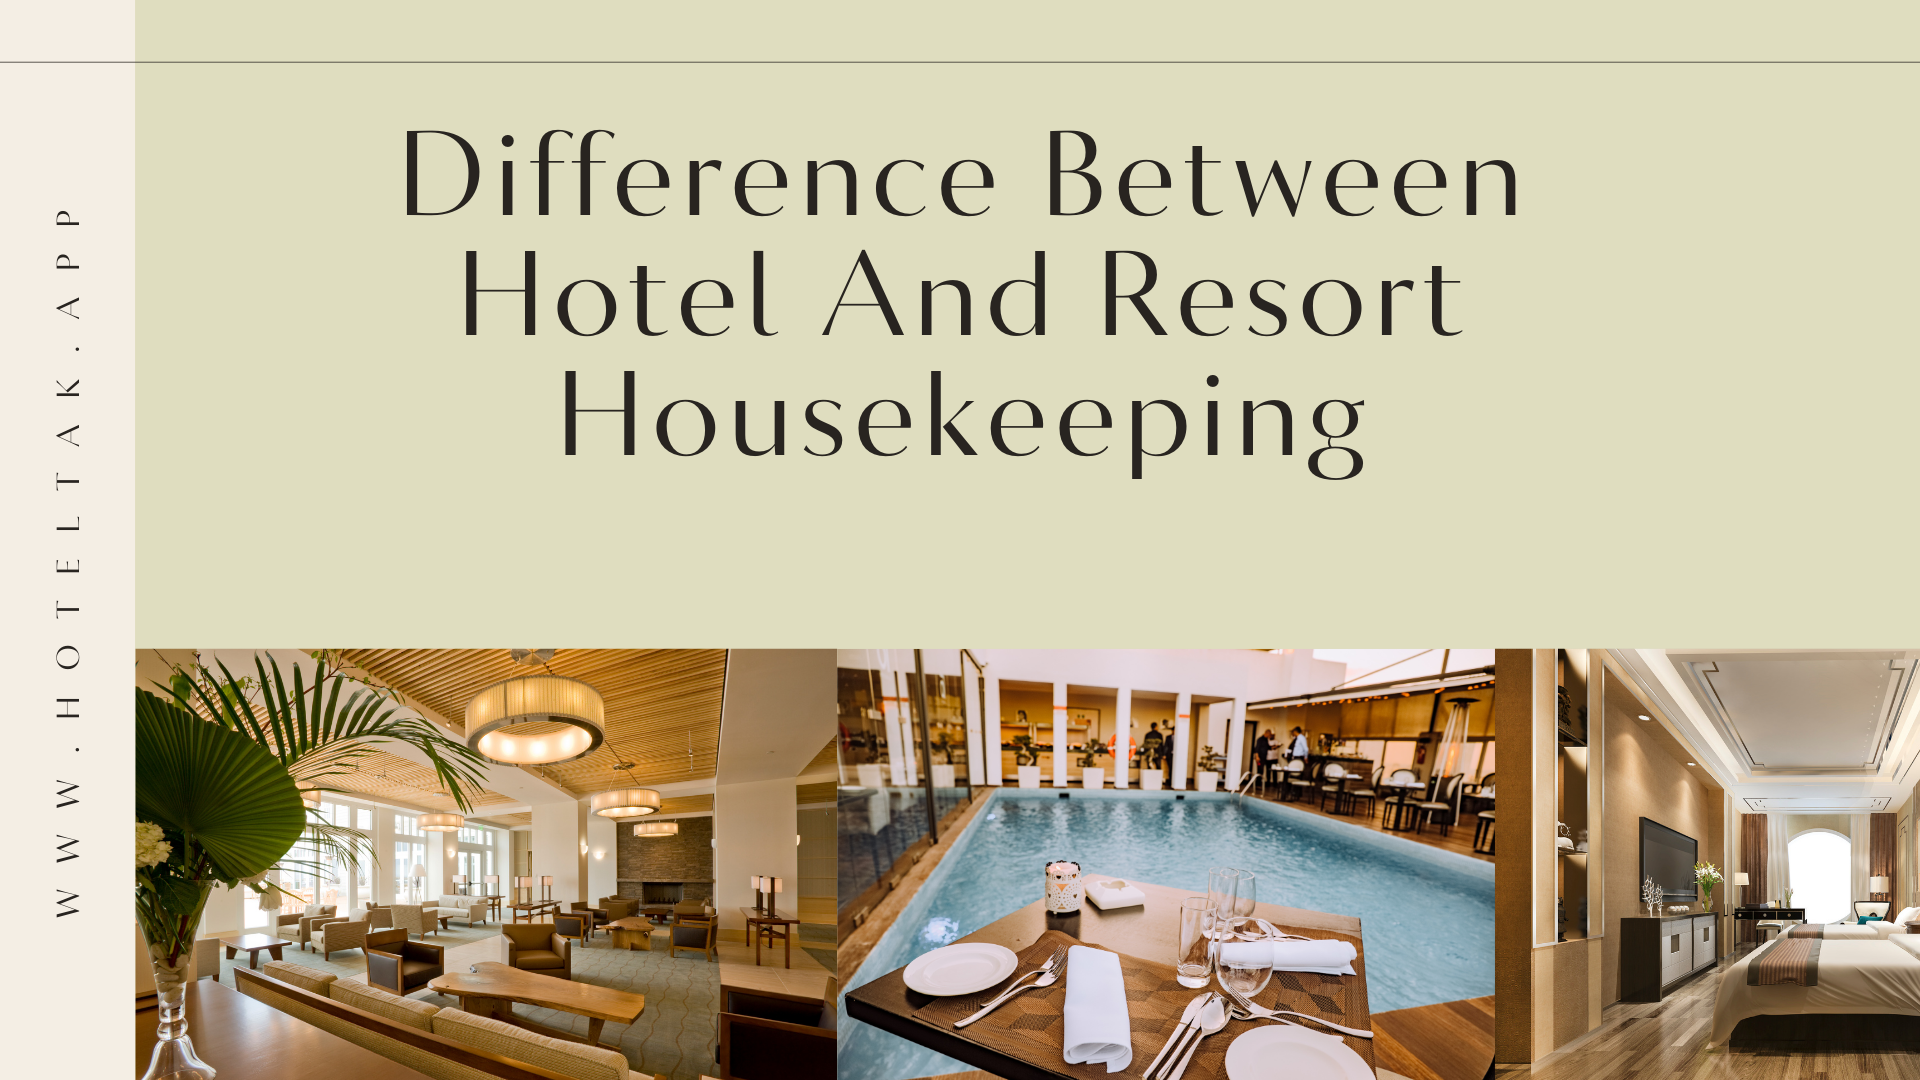 Difference Between Hotel And Resort Housekeeping